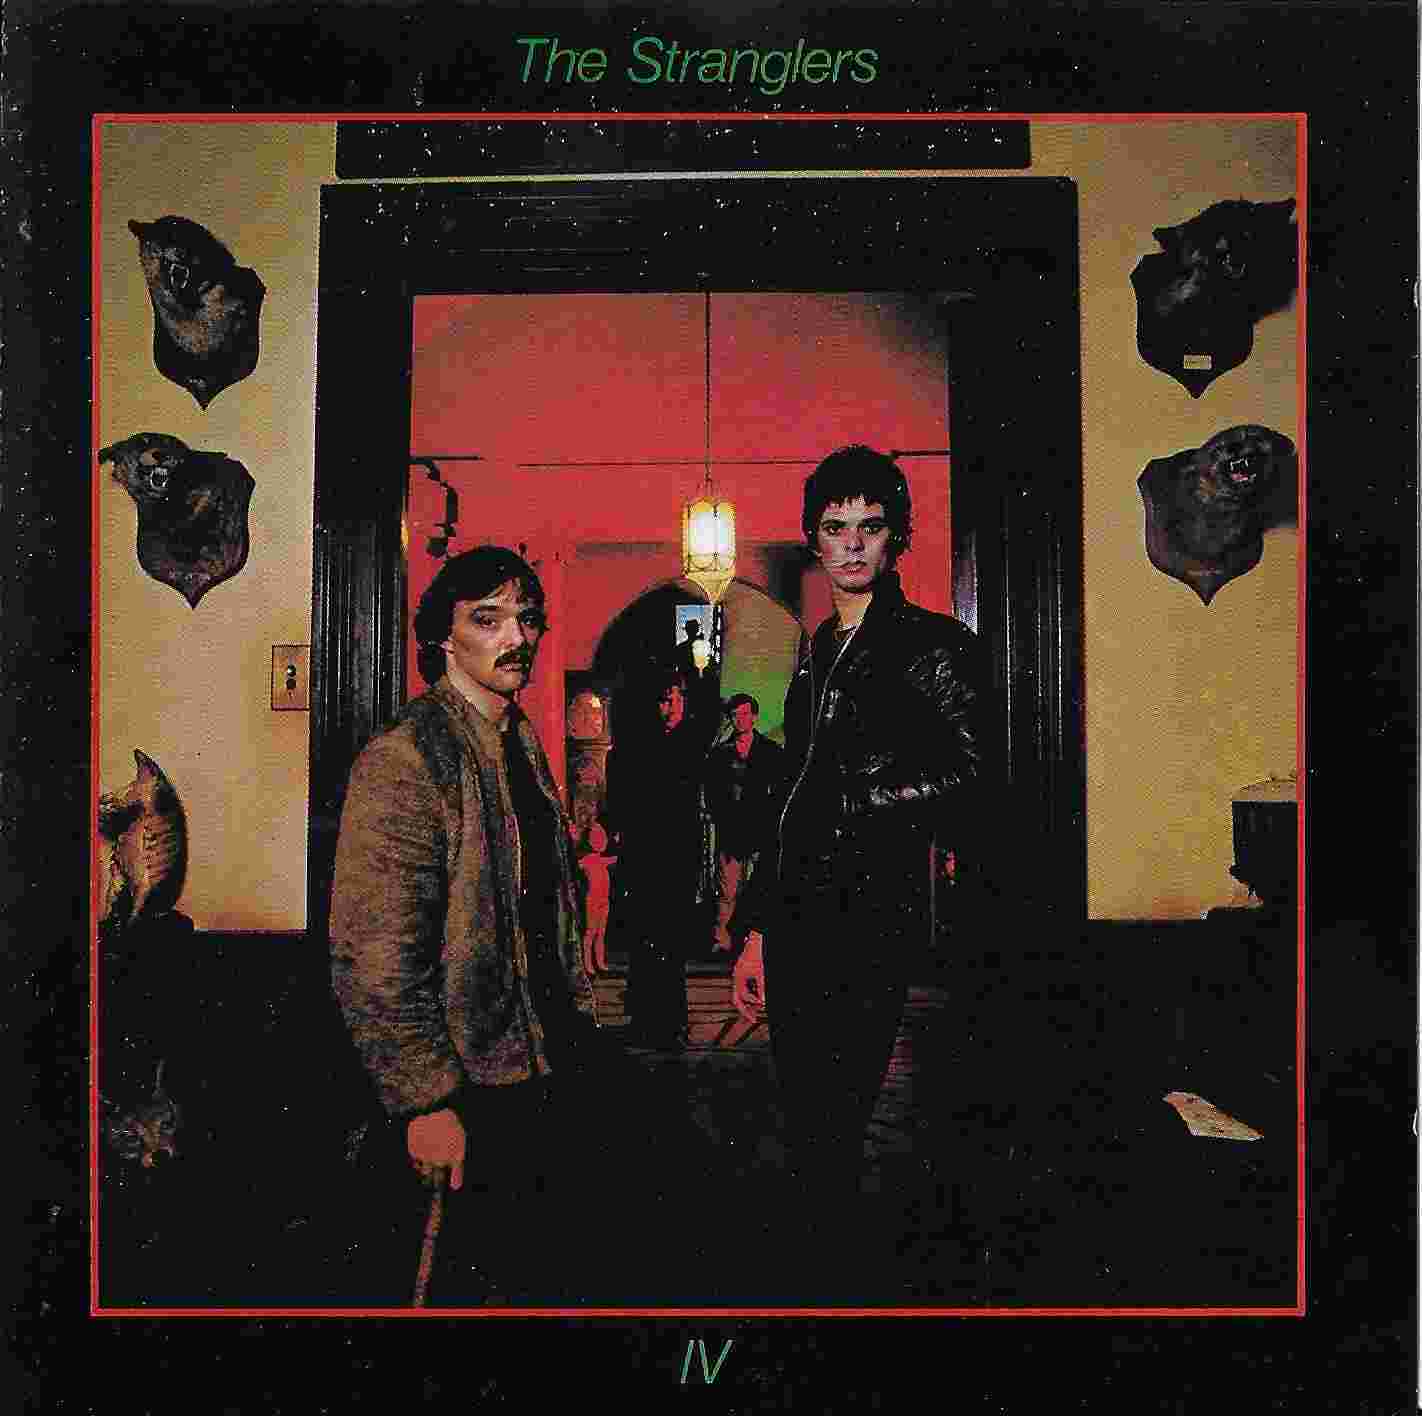 Picture of Rattus norvegicus by artist The Stranglers from The Stranglers cds